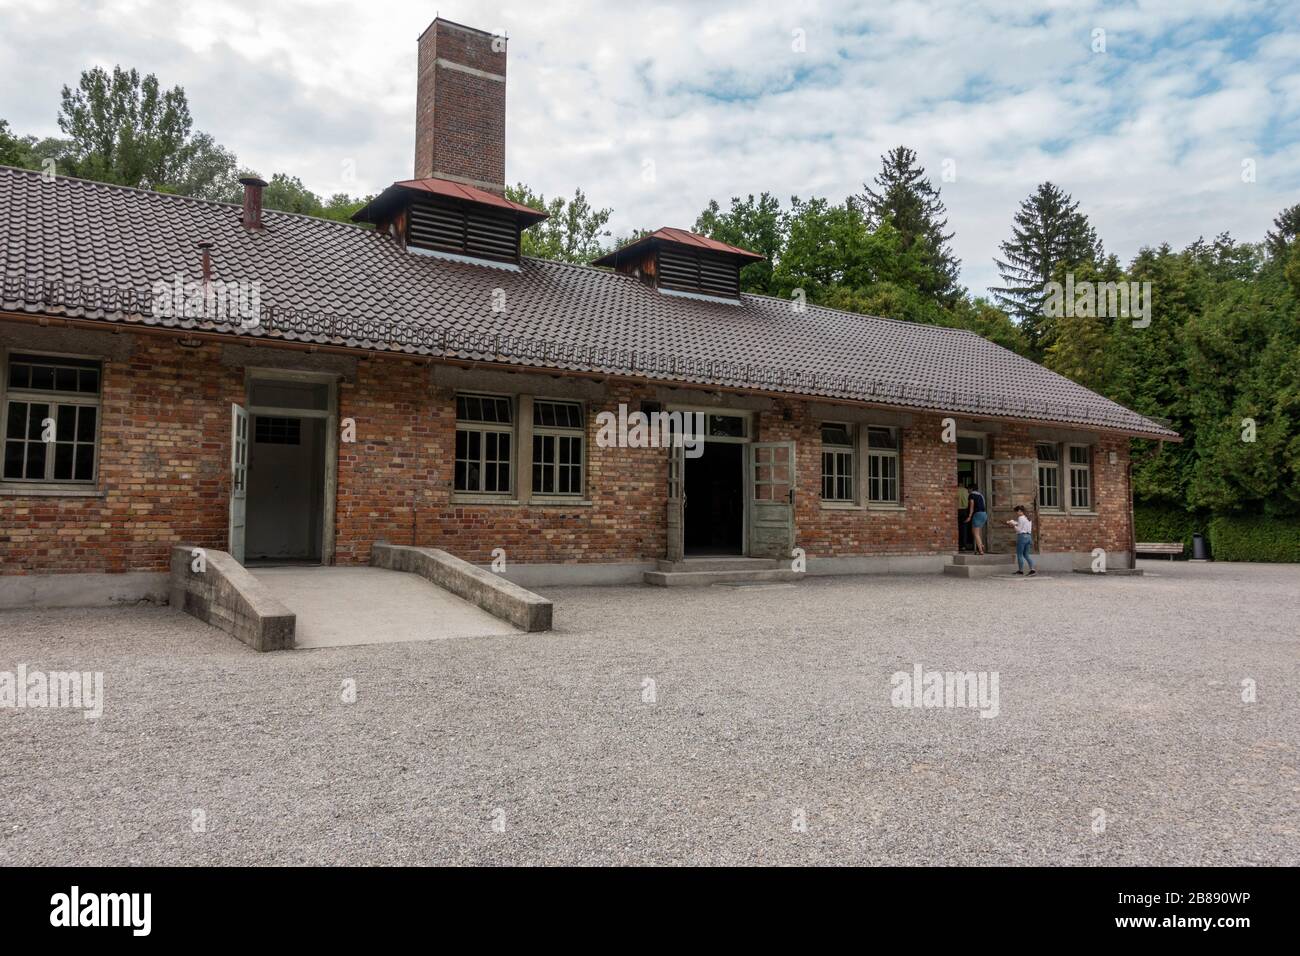 The second Crematoria building, Barrack X at the former Nazi German Dachau concentration camp, Munich, Germany. Stock Photo